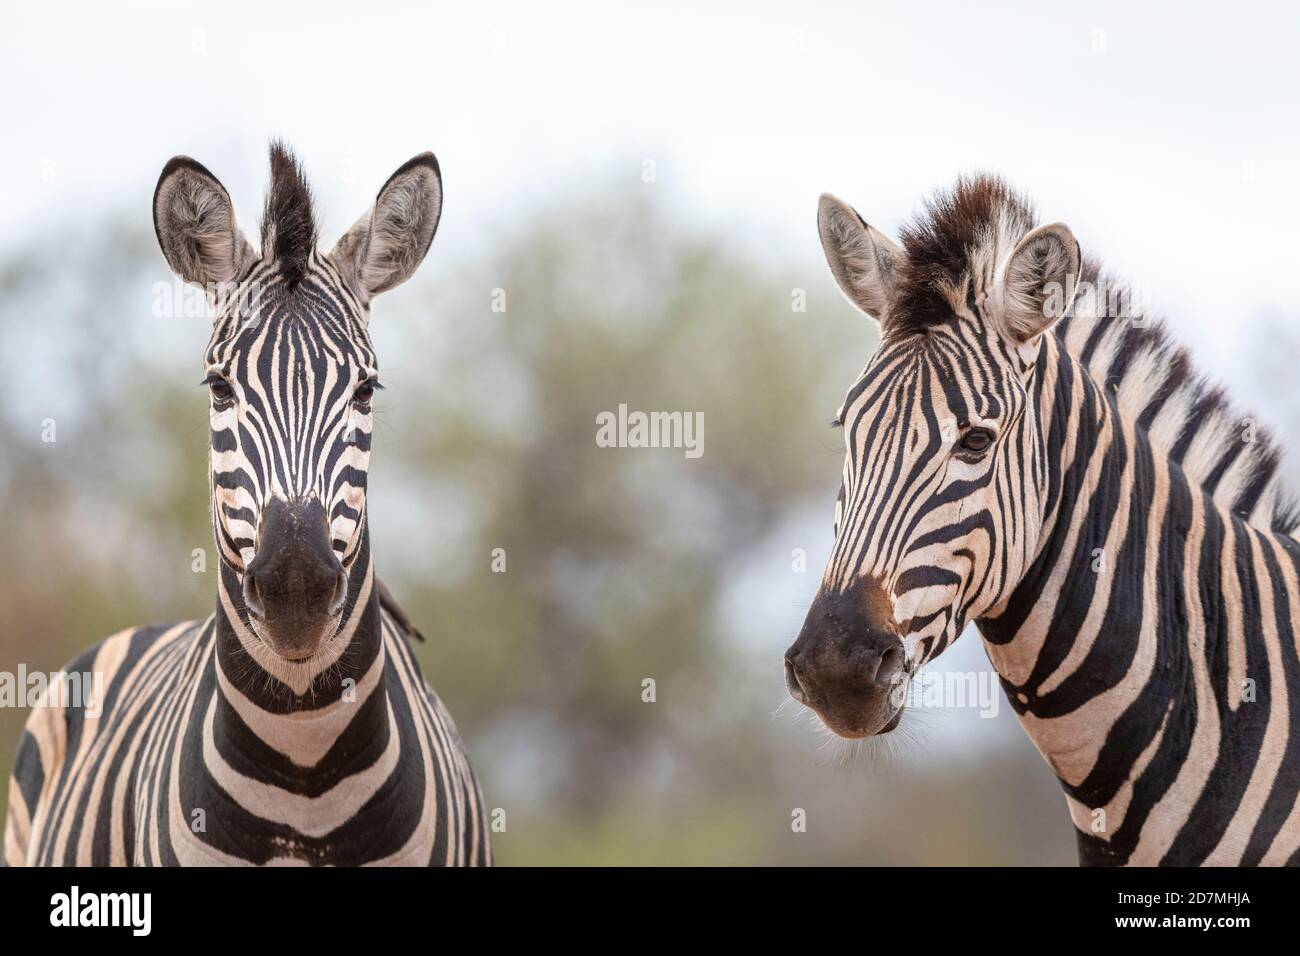 Horizontal portrait of two zebras looking alert in Kruger Park in South Africa Stock Photo